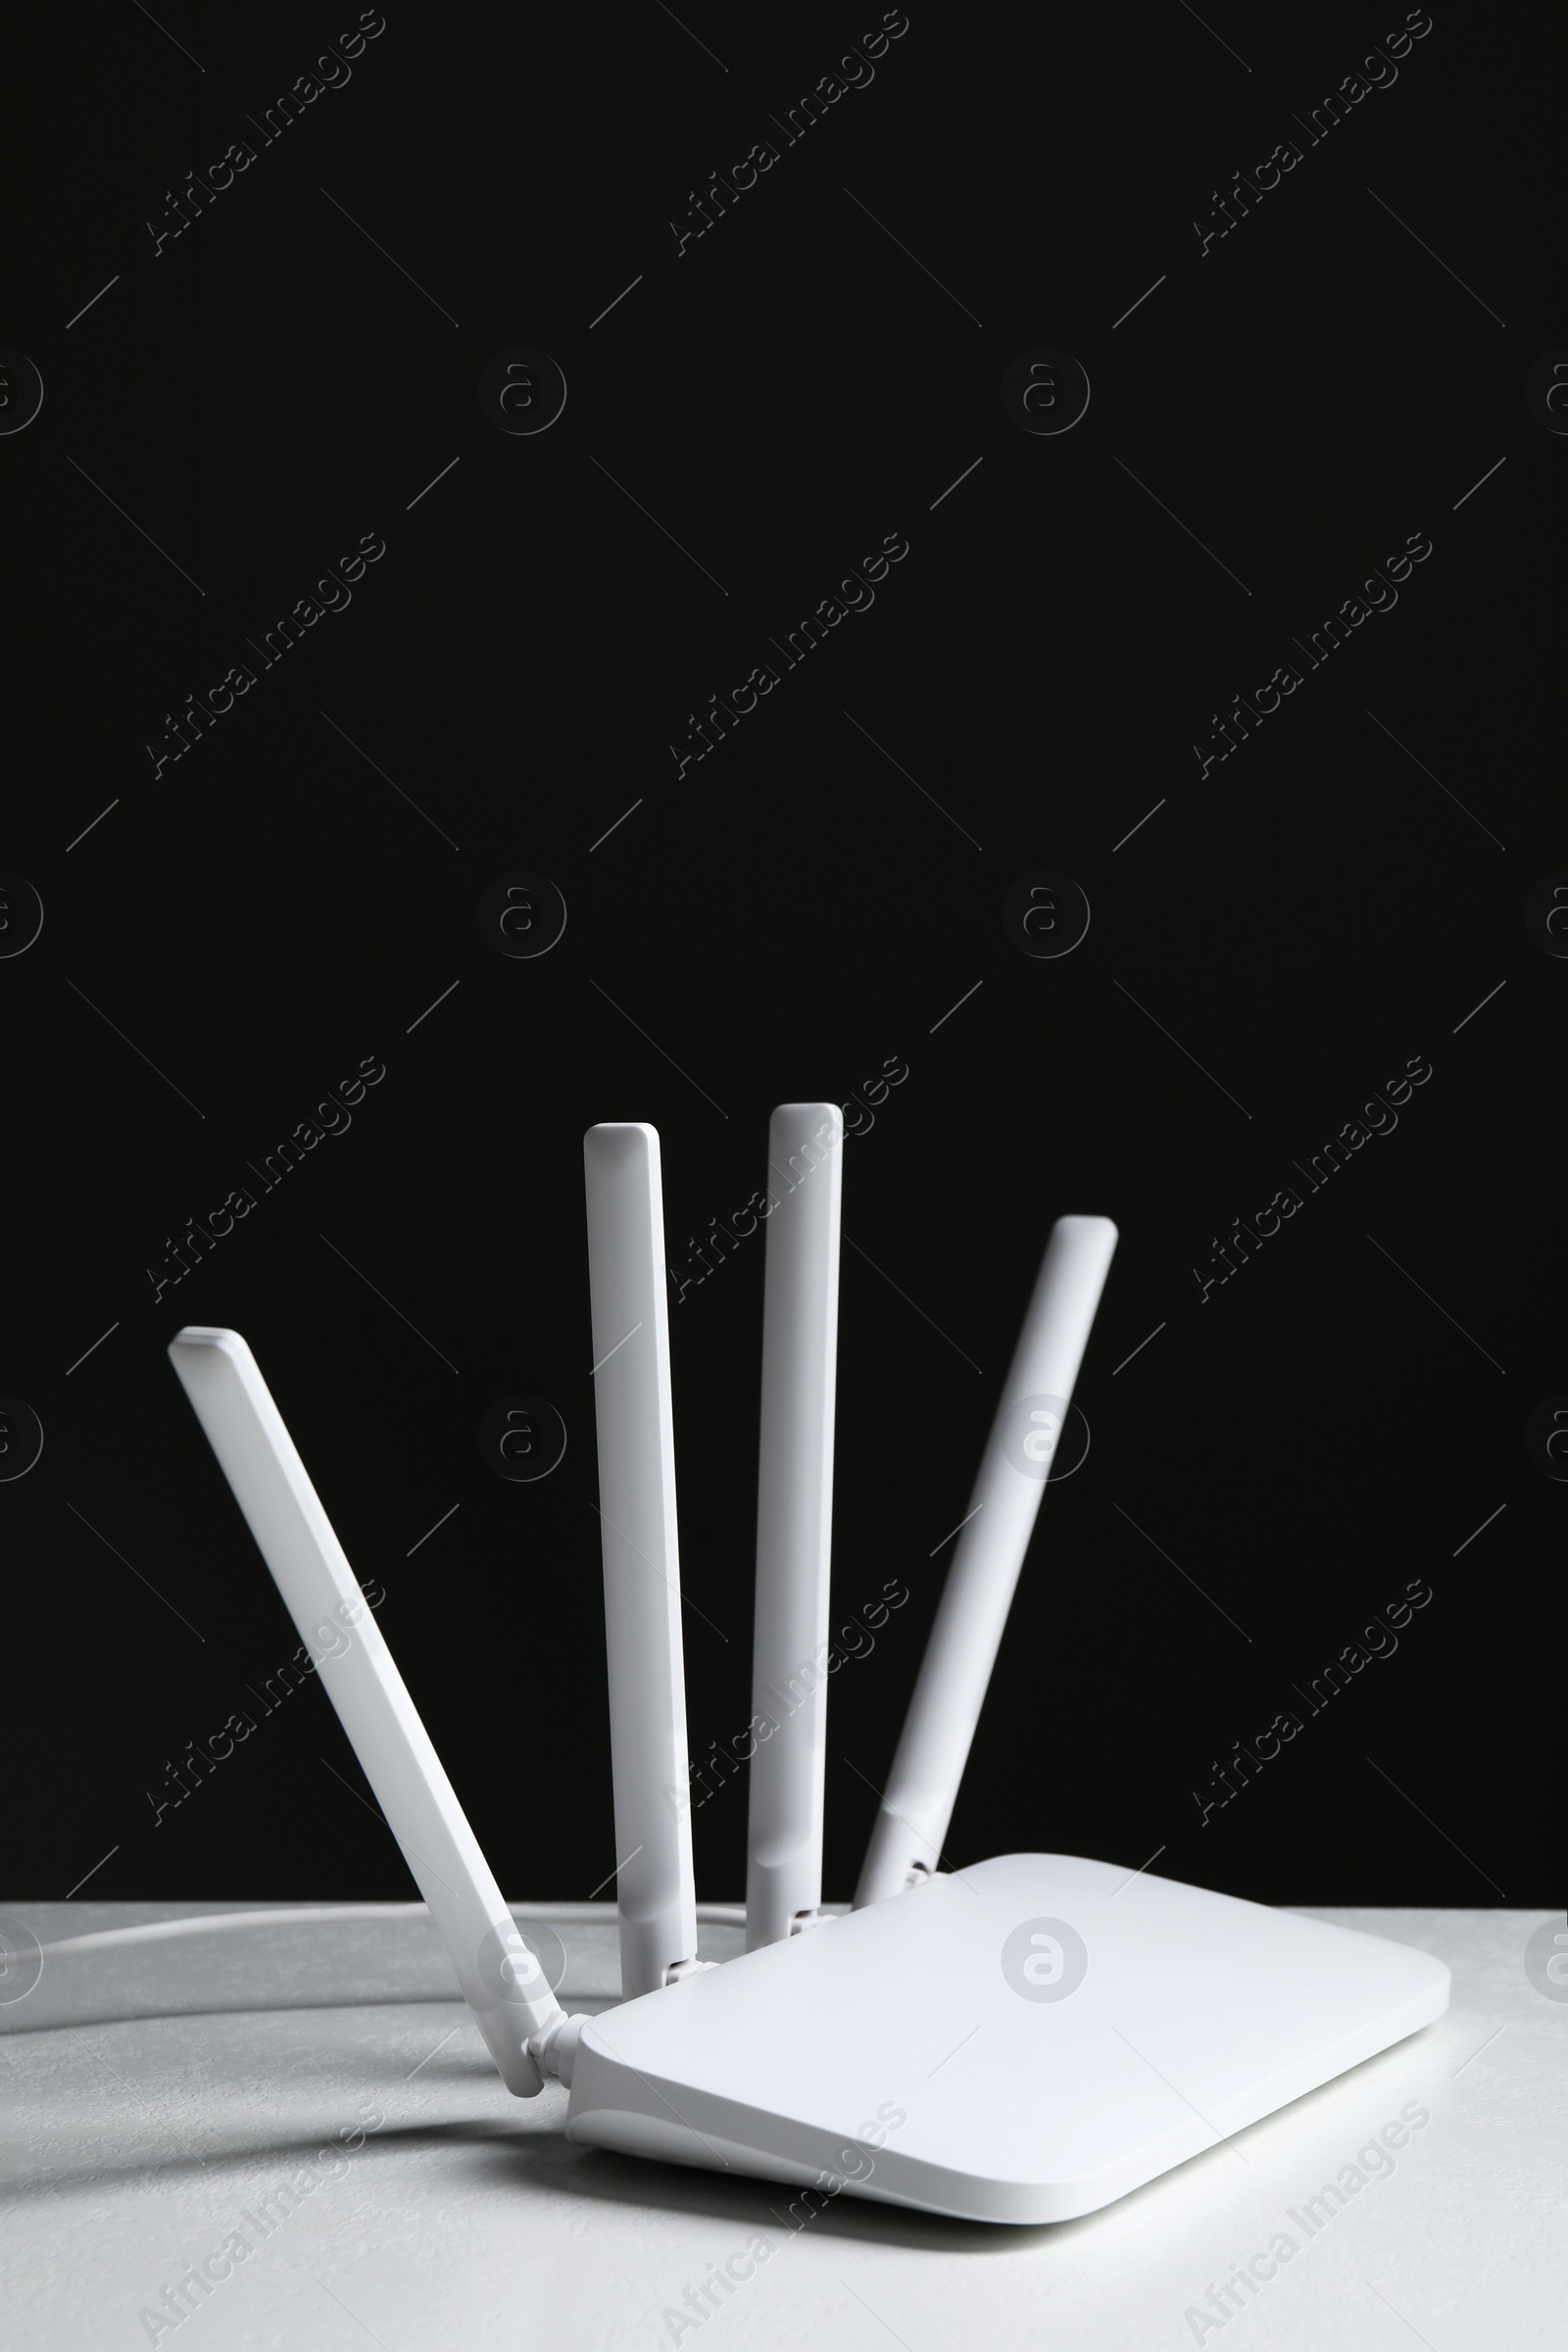 Photo of New modern Wi-Fi router on white table against black background